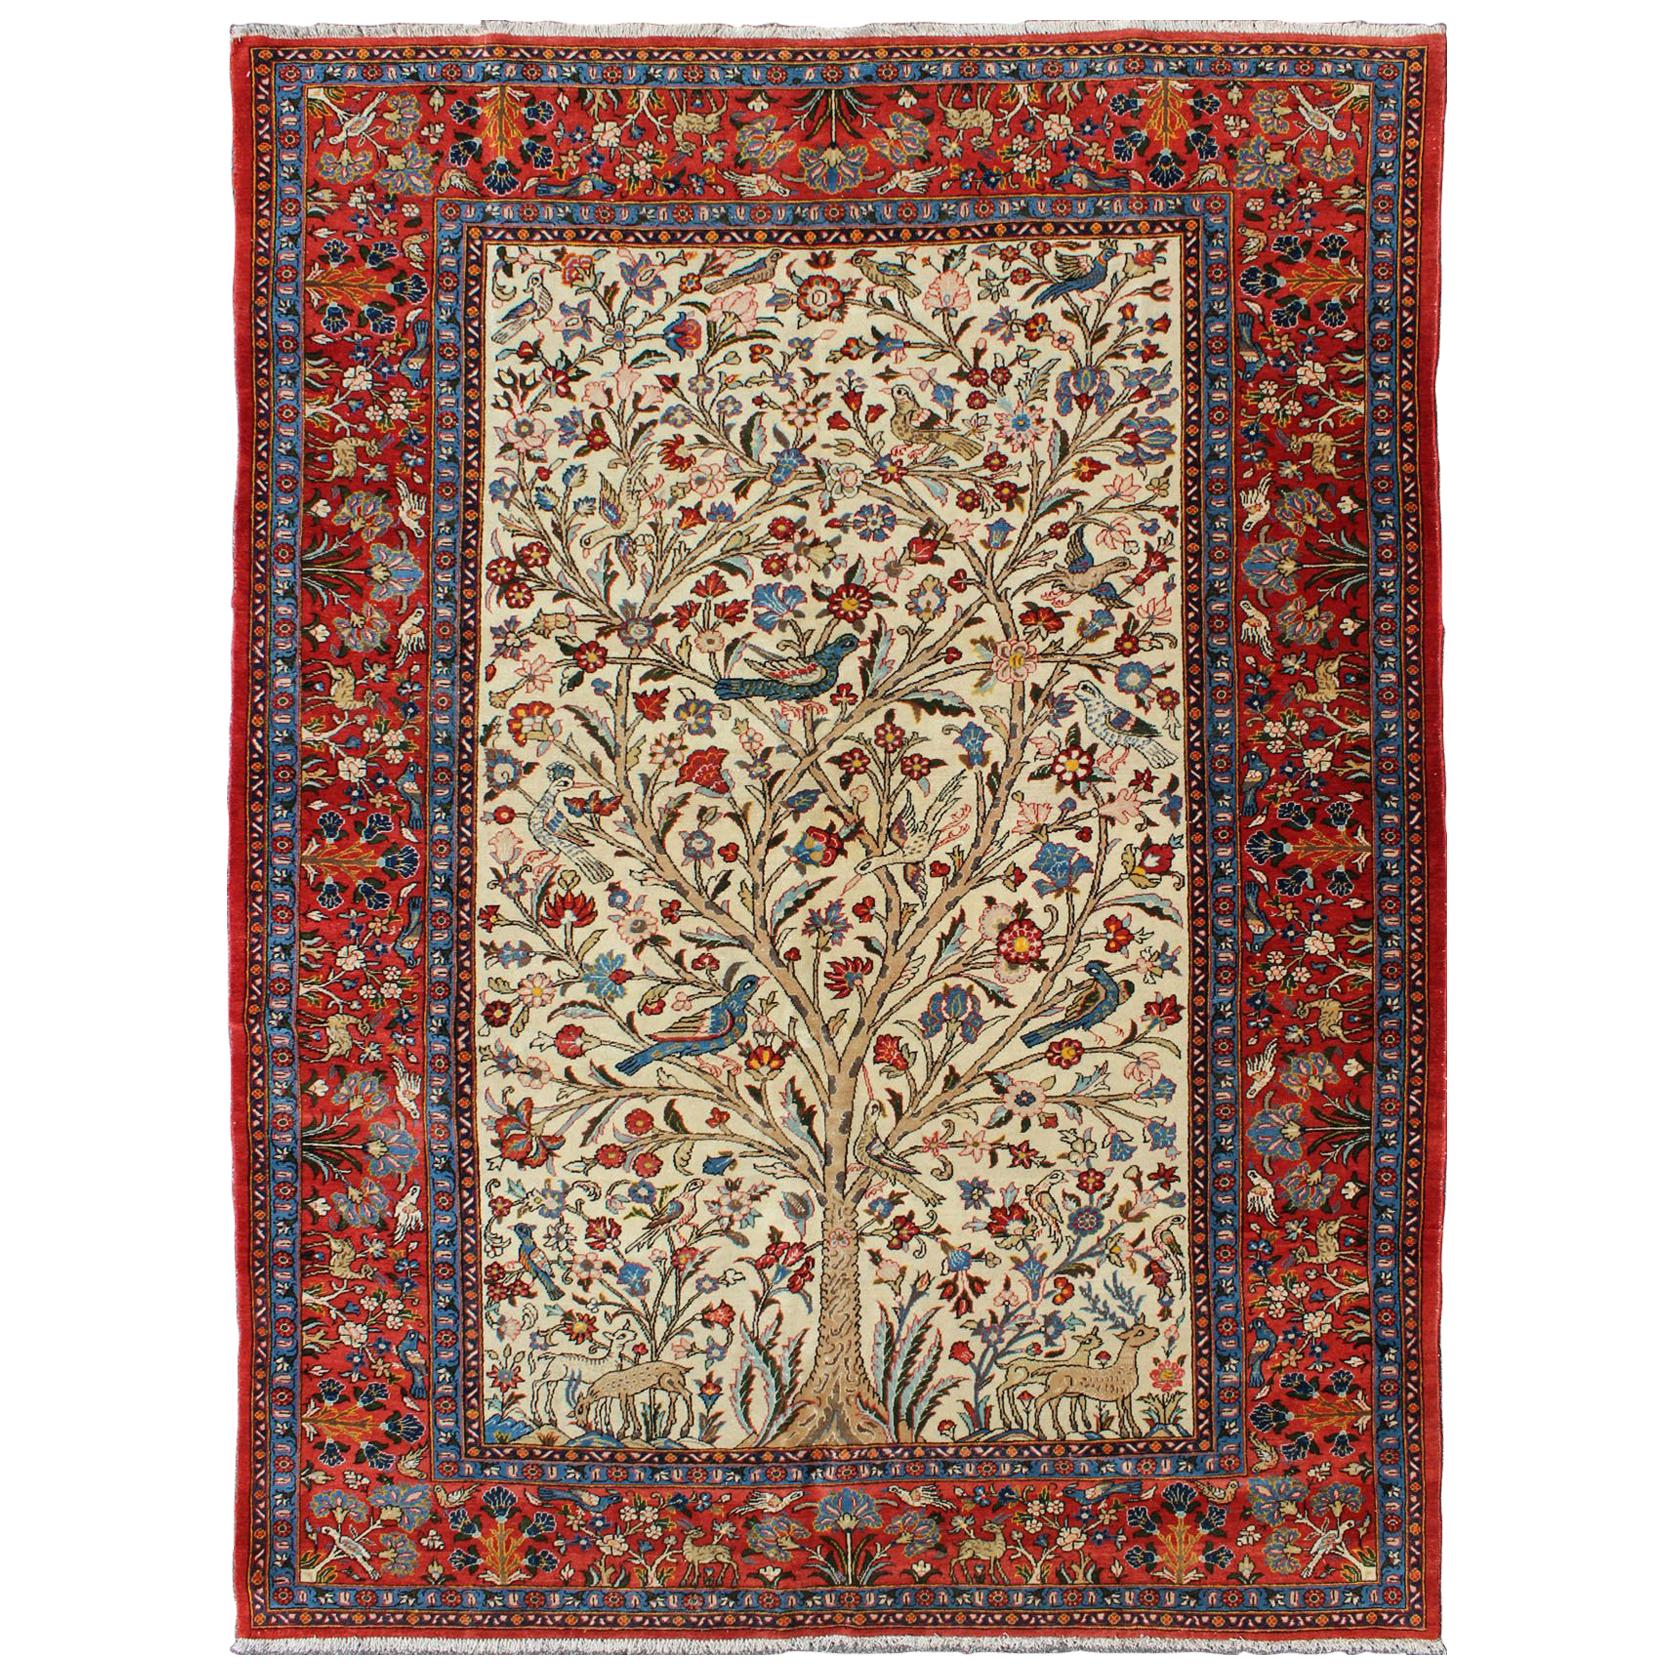 Fine Persian Qum Rug with Detailed All-Over Floral and Bird Design